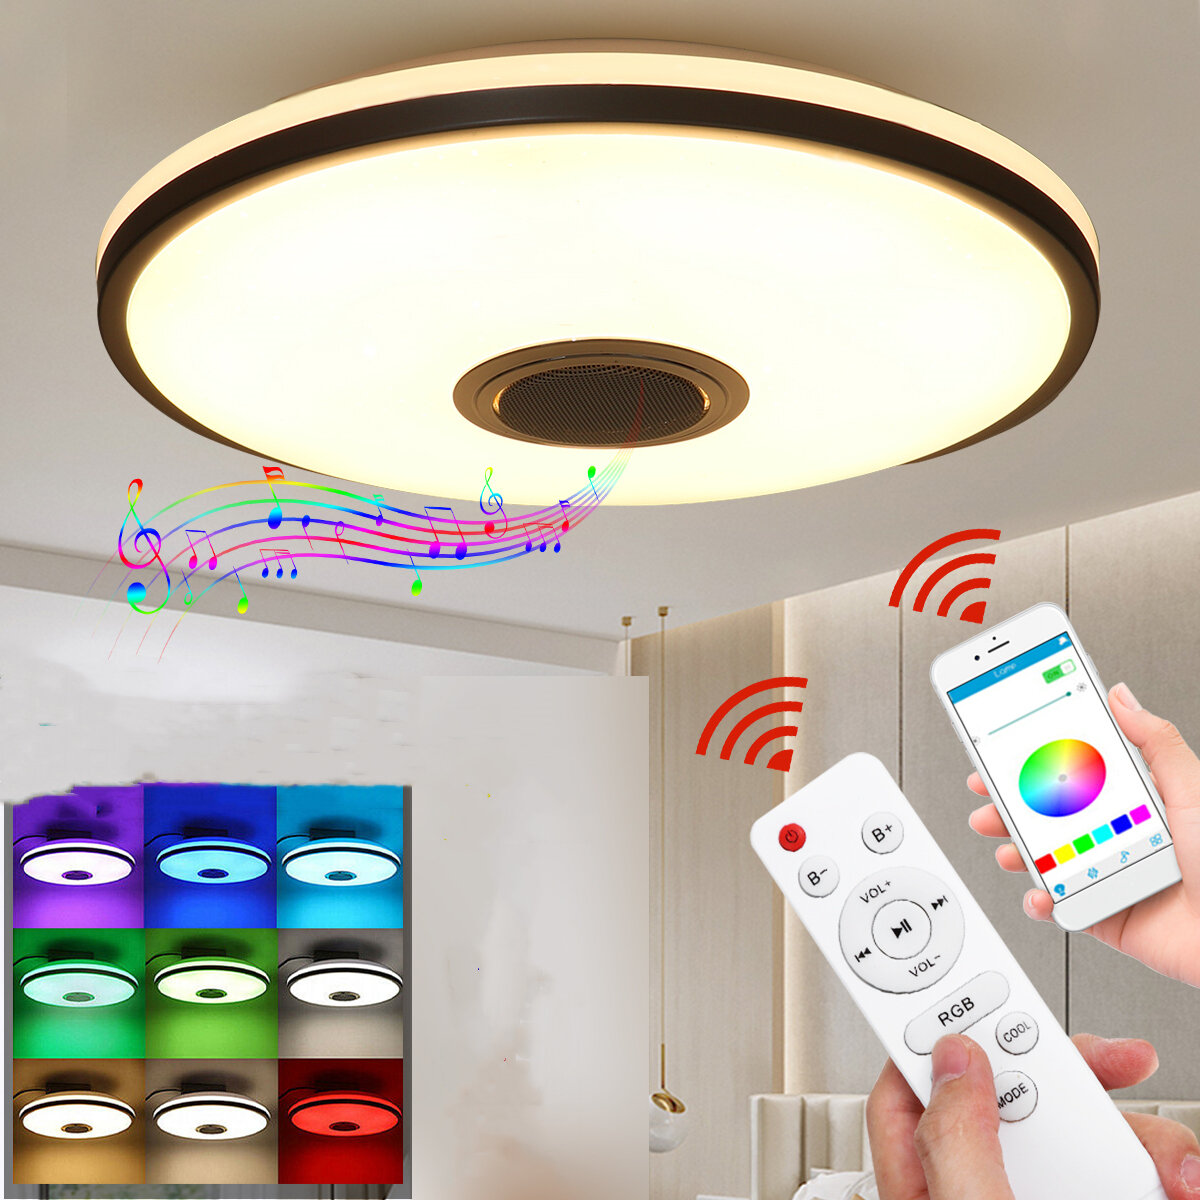 

30W 60W bluetooth LED Ceiling Light Smart Music Chandelier APP Intelligent RGB Lamp with Remote Control